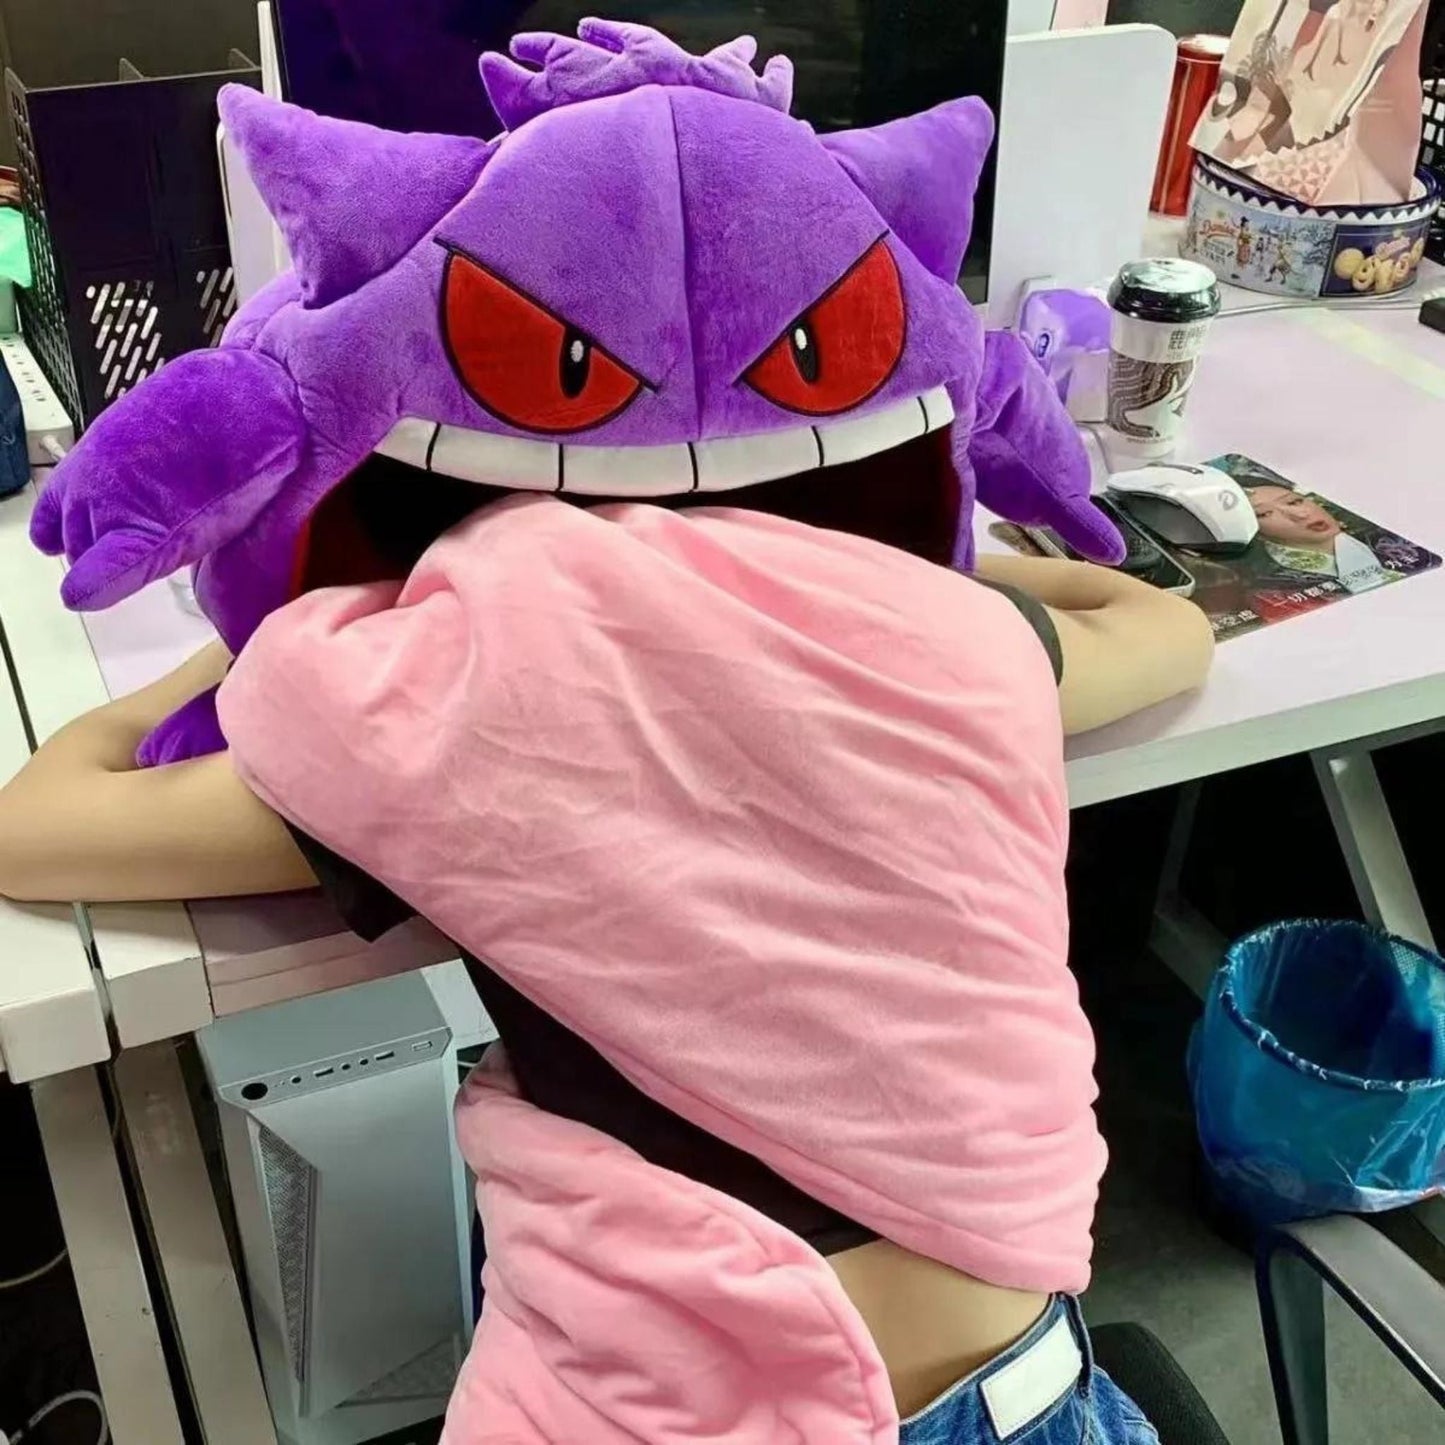 Sleeping - Gengar Tongue Pillow Blanket Sleeping Pod For Afternoon Naps. Portable design for travel, work and on the go napping. Perfect gift for Pokémon fans.